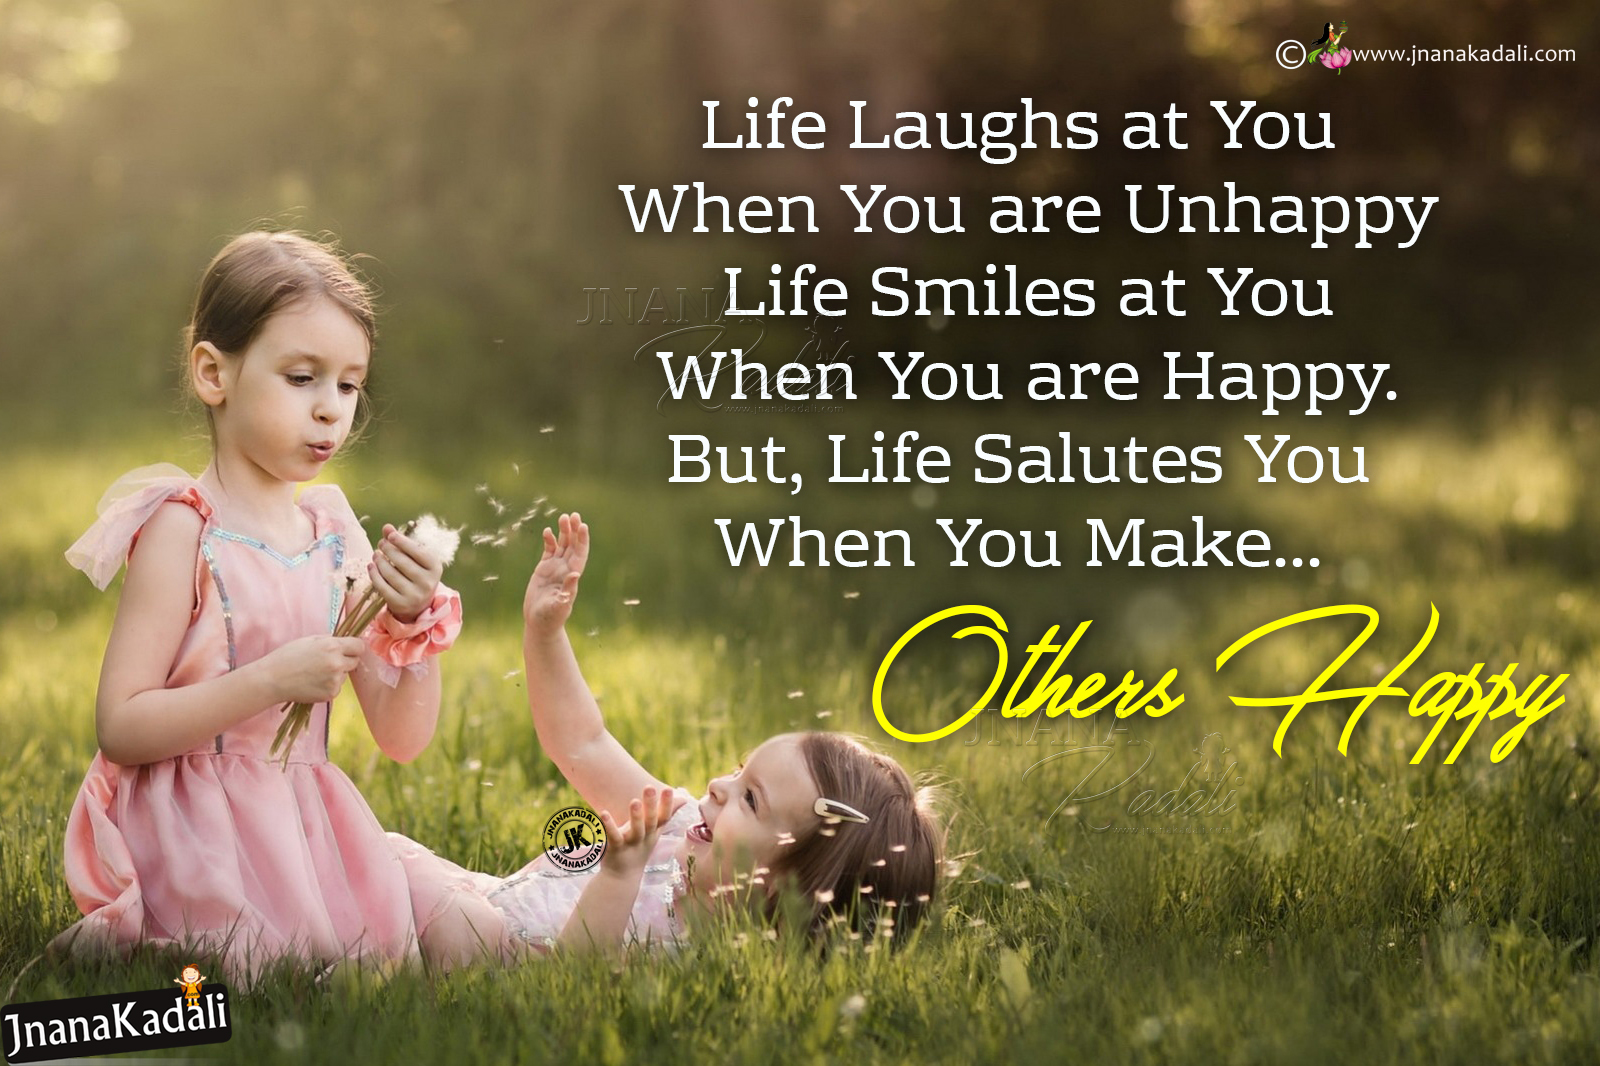 Quotes in English. Happy Life. Happiness quotes in English. Happy Life and unhappy. Short happy life